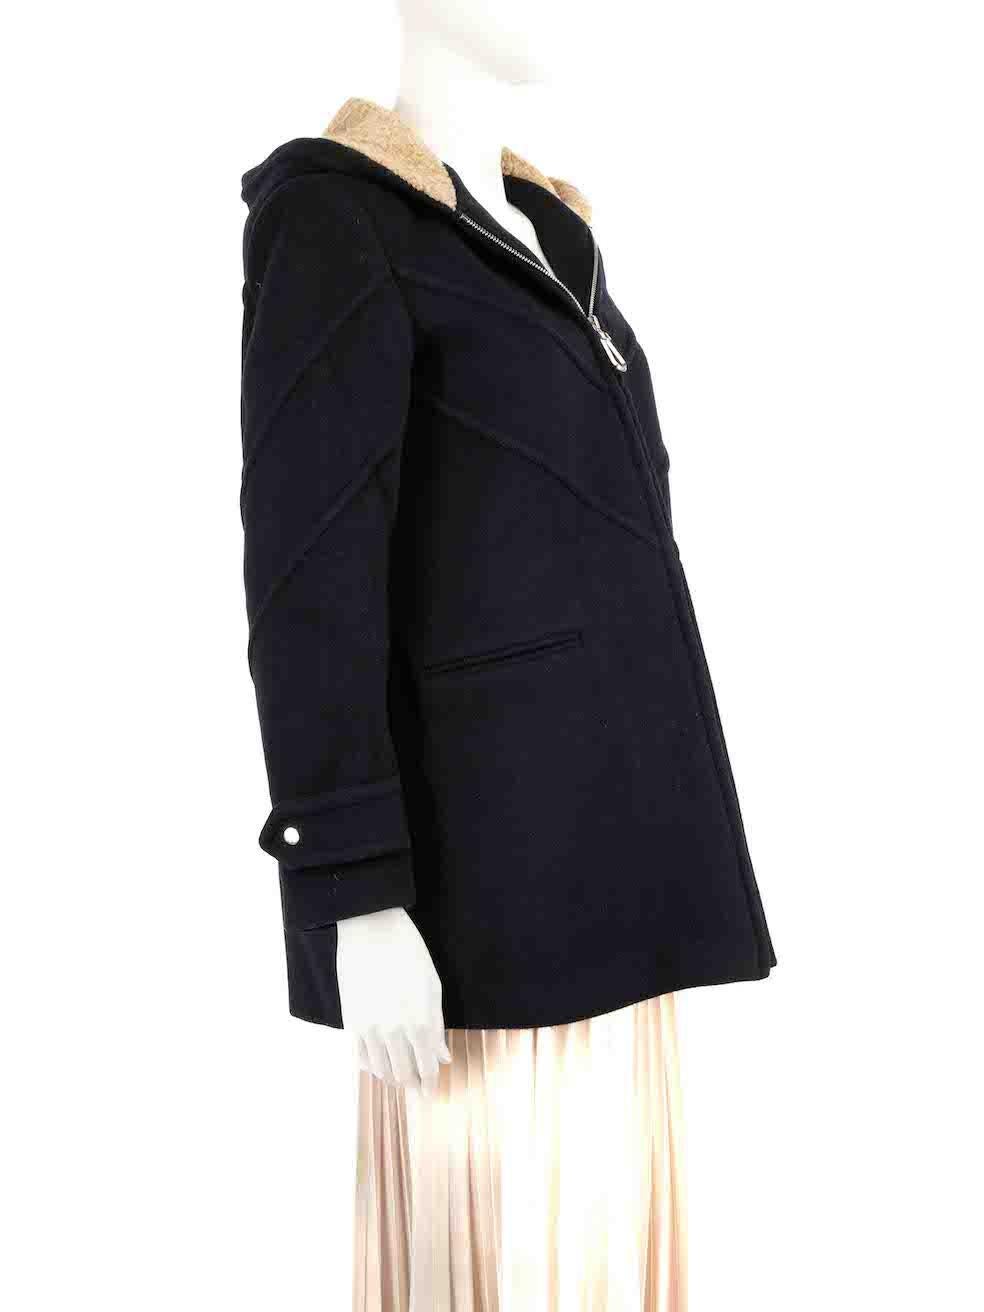 CONDITION is Very good. Hardly any visible wear to coat is evident on this used Sandro designer resale item.
 
 
 
 Details
 
 
 Phraise model
 
 Navy
 
 Wool
 
 Parka coat
 
 Front zip closure
 
 Hooded
 
 Buttoned cuffs
 
 2x Front side pockets
 
